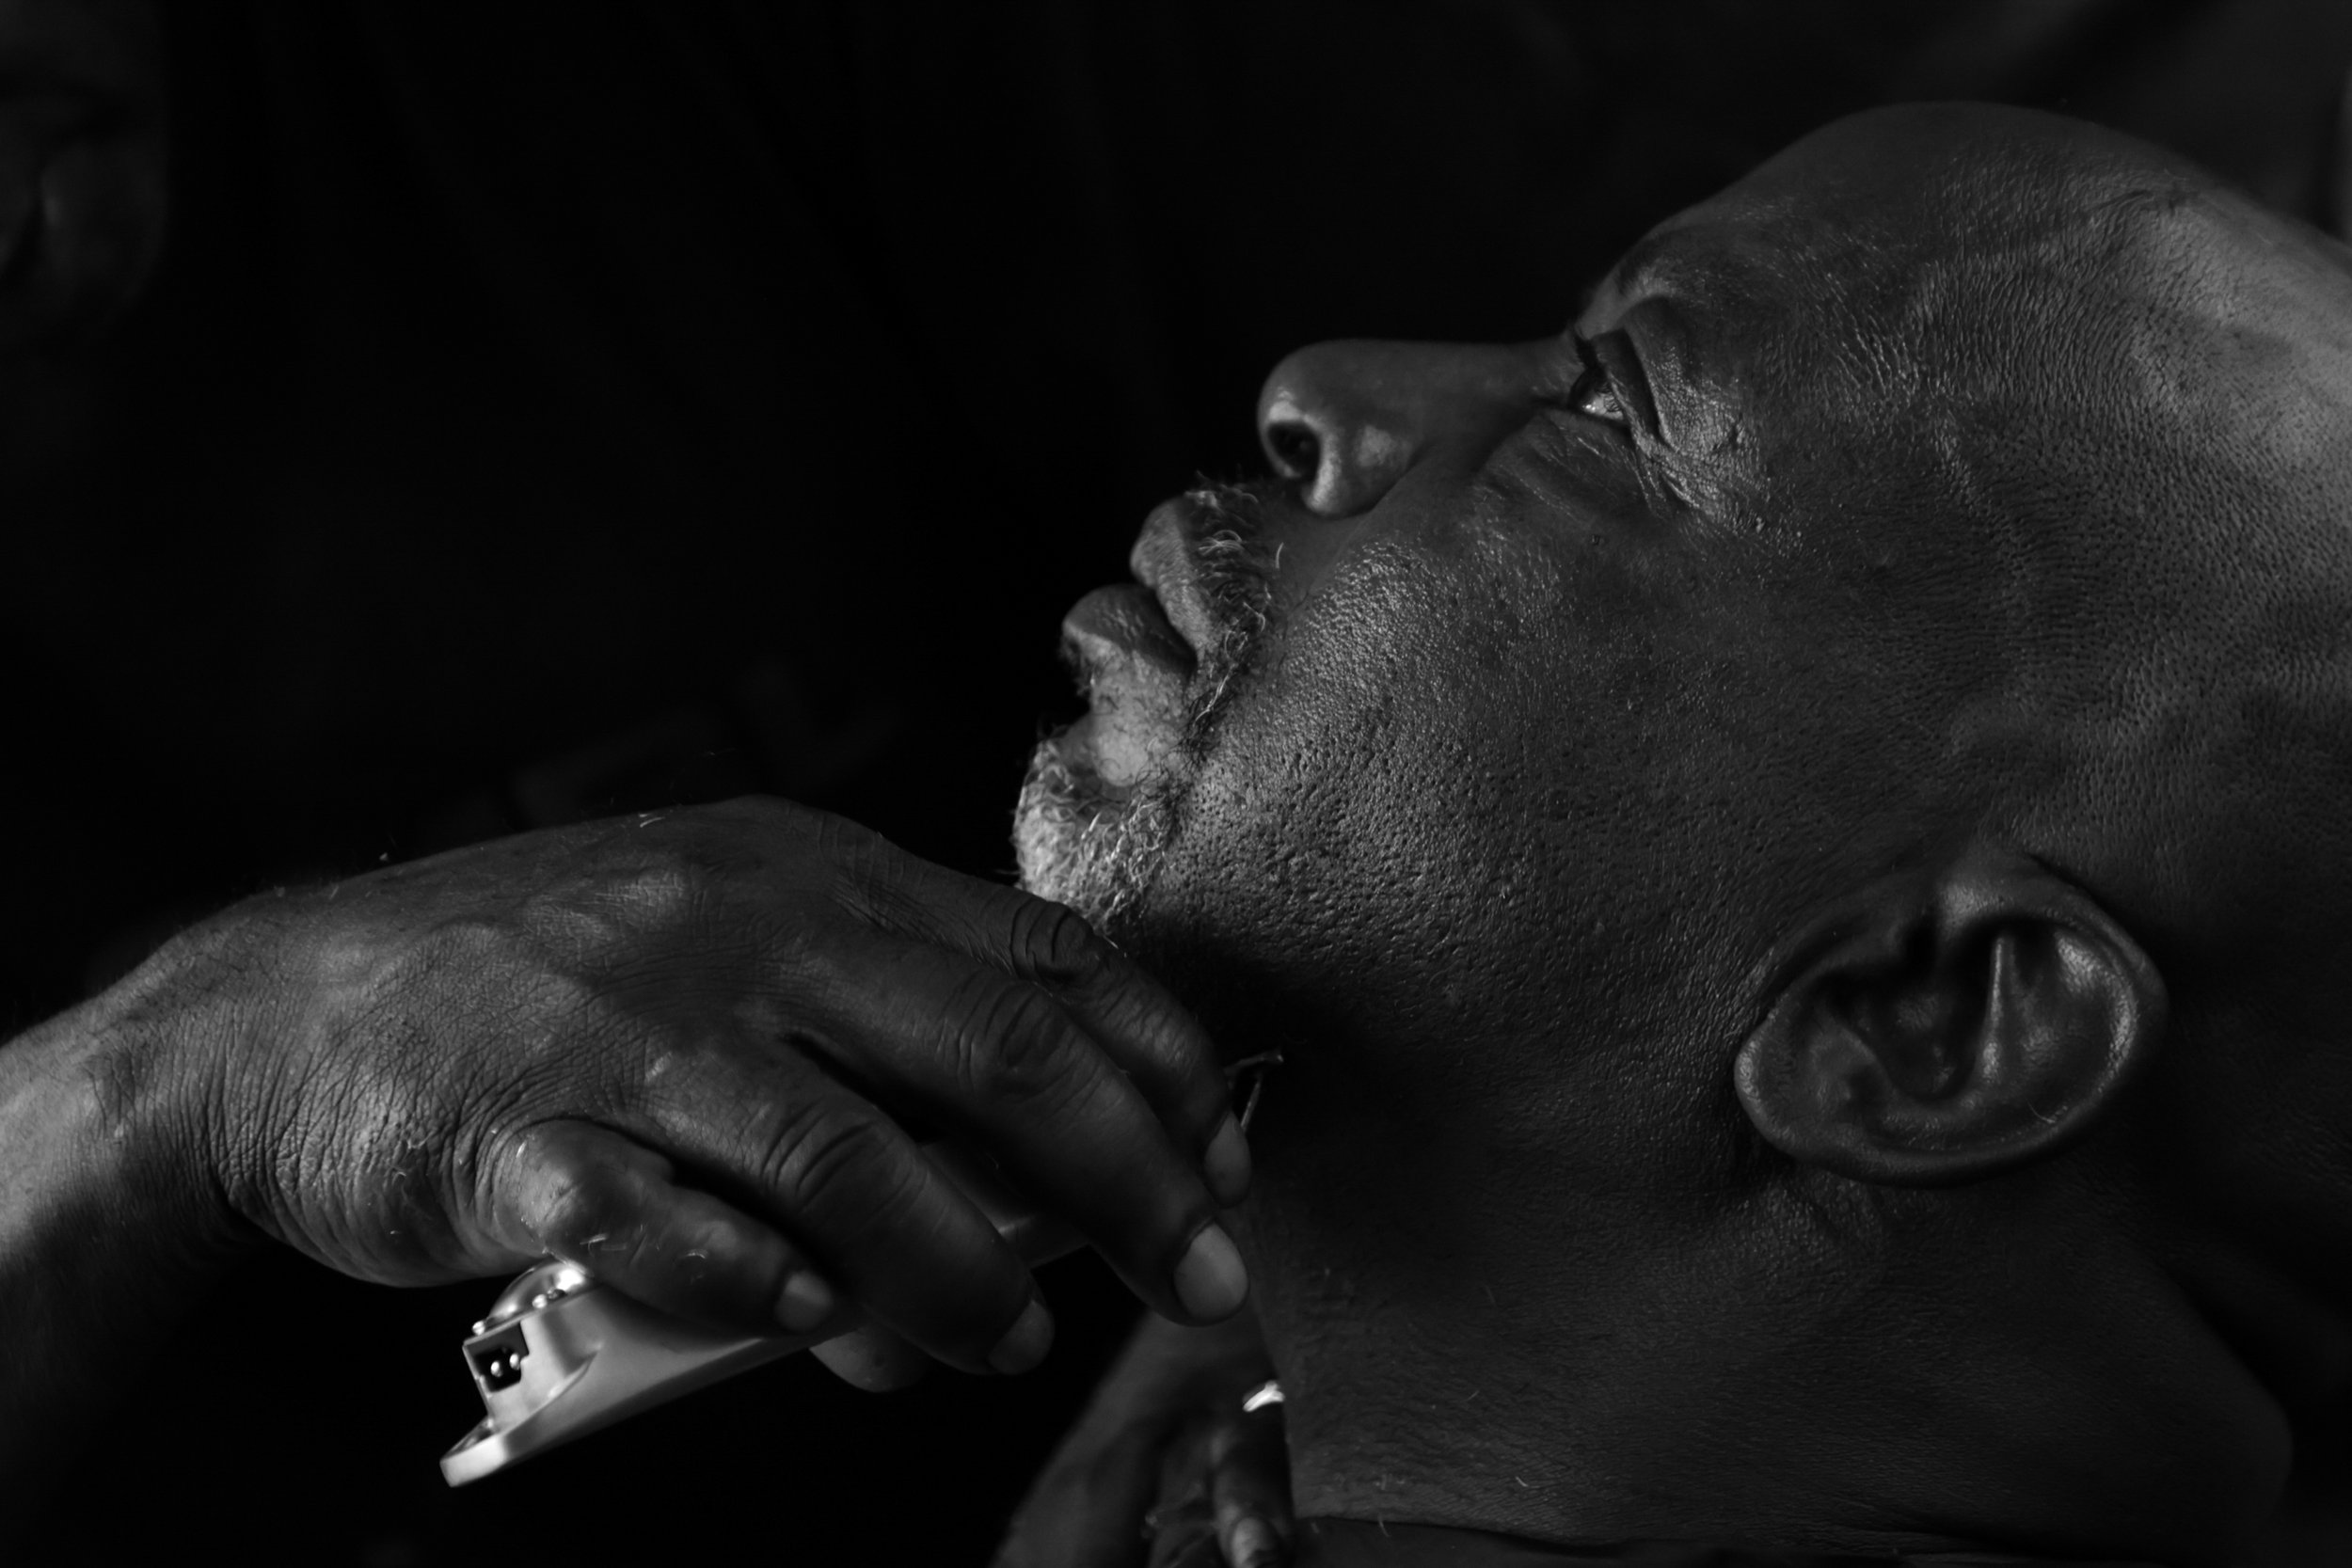  Derrick Thomas, who prefers to go by Hawk, is a barber living on Skid Row. The 65-year-old Louisiana native has called Skid Row home for the last seven years, previously serving time in jail and the military. He smokes and sells methenamine, sometim